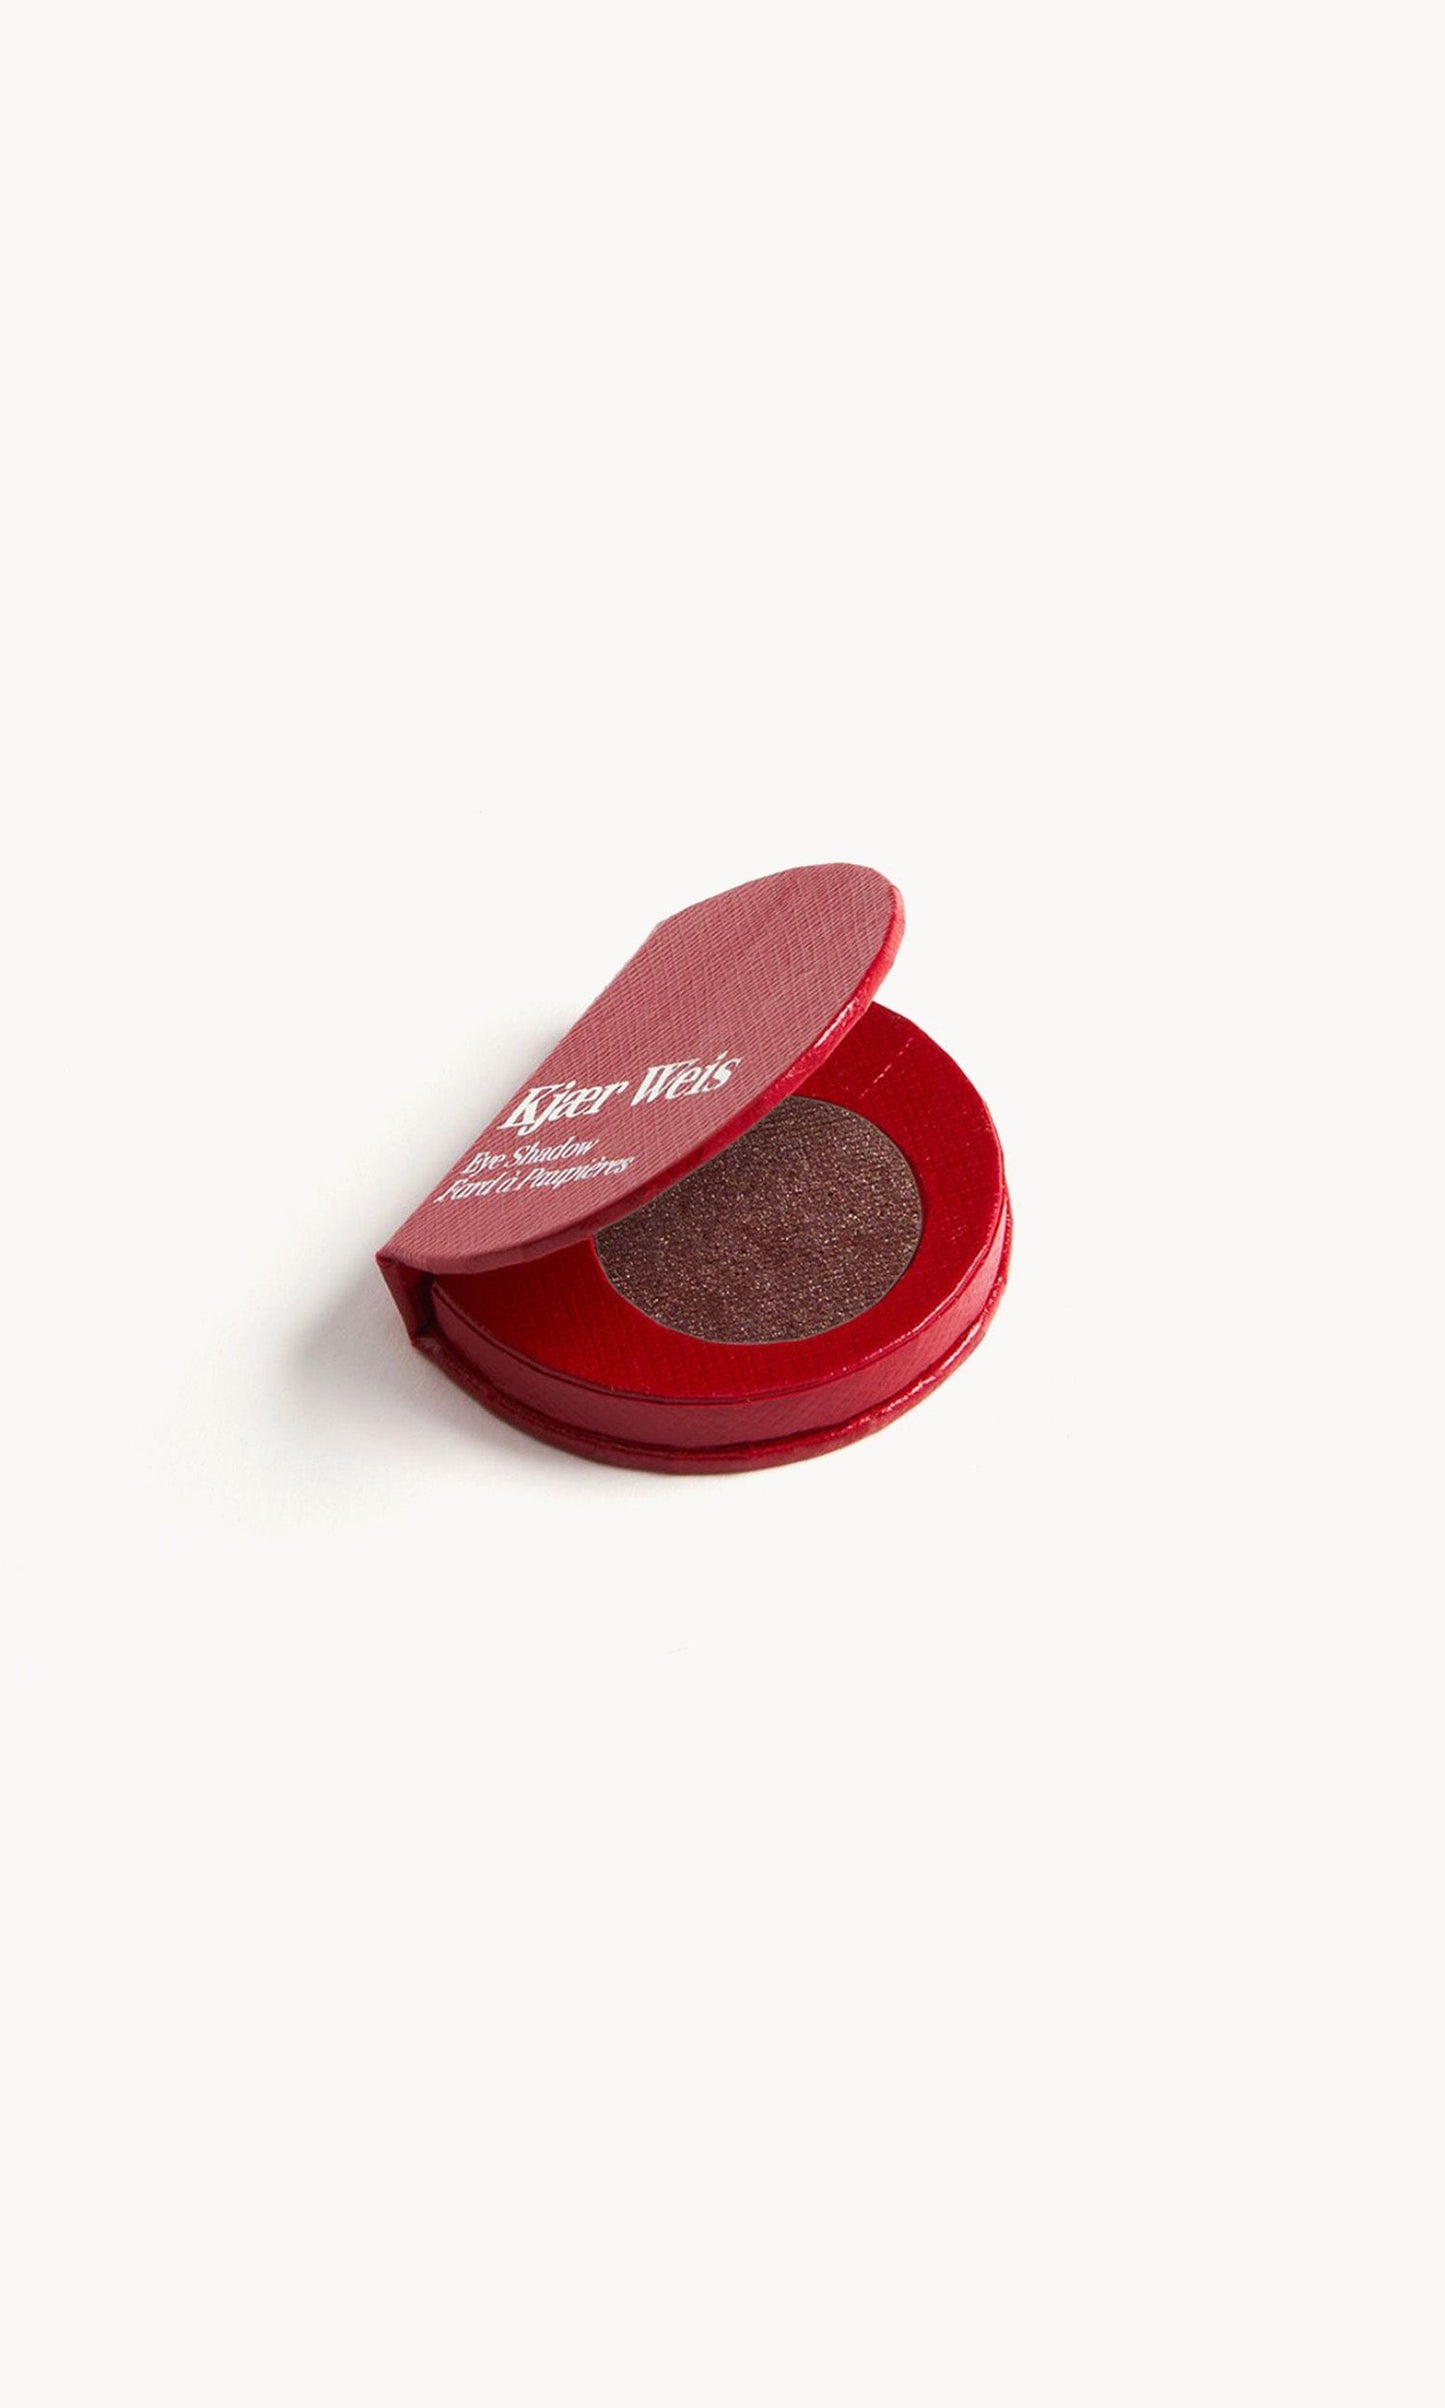 Red KW palette open to show the metallic reddish-brown copper eye shadow inside